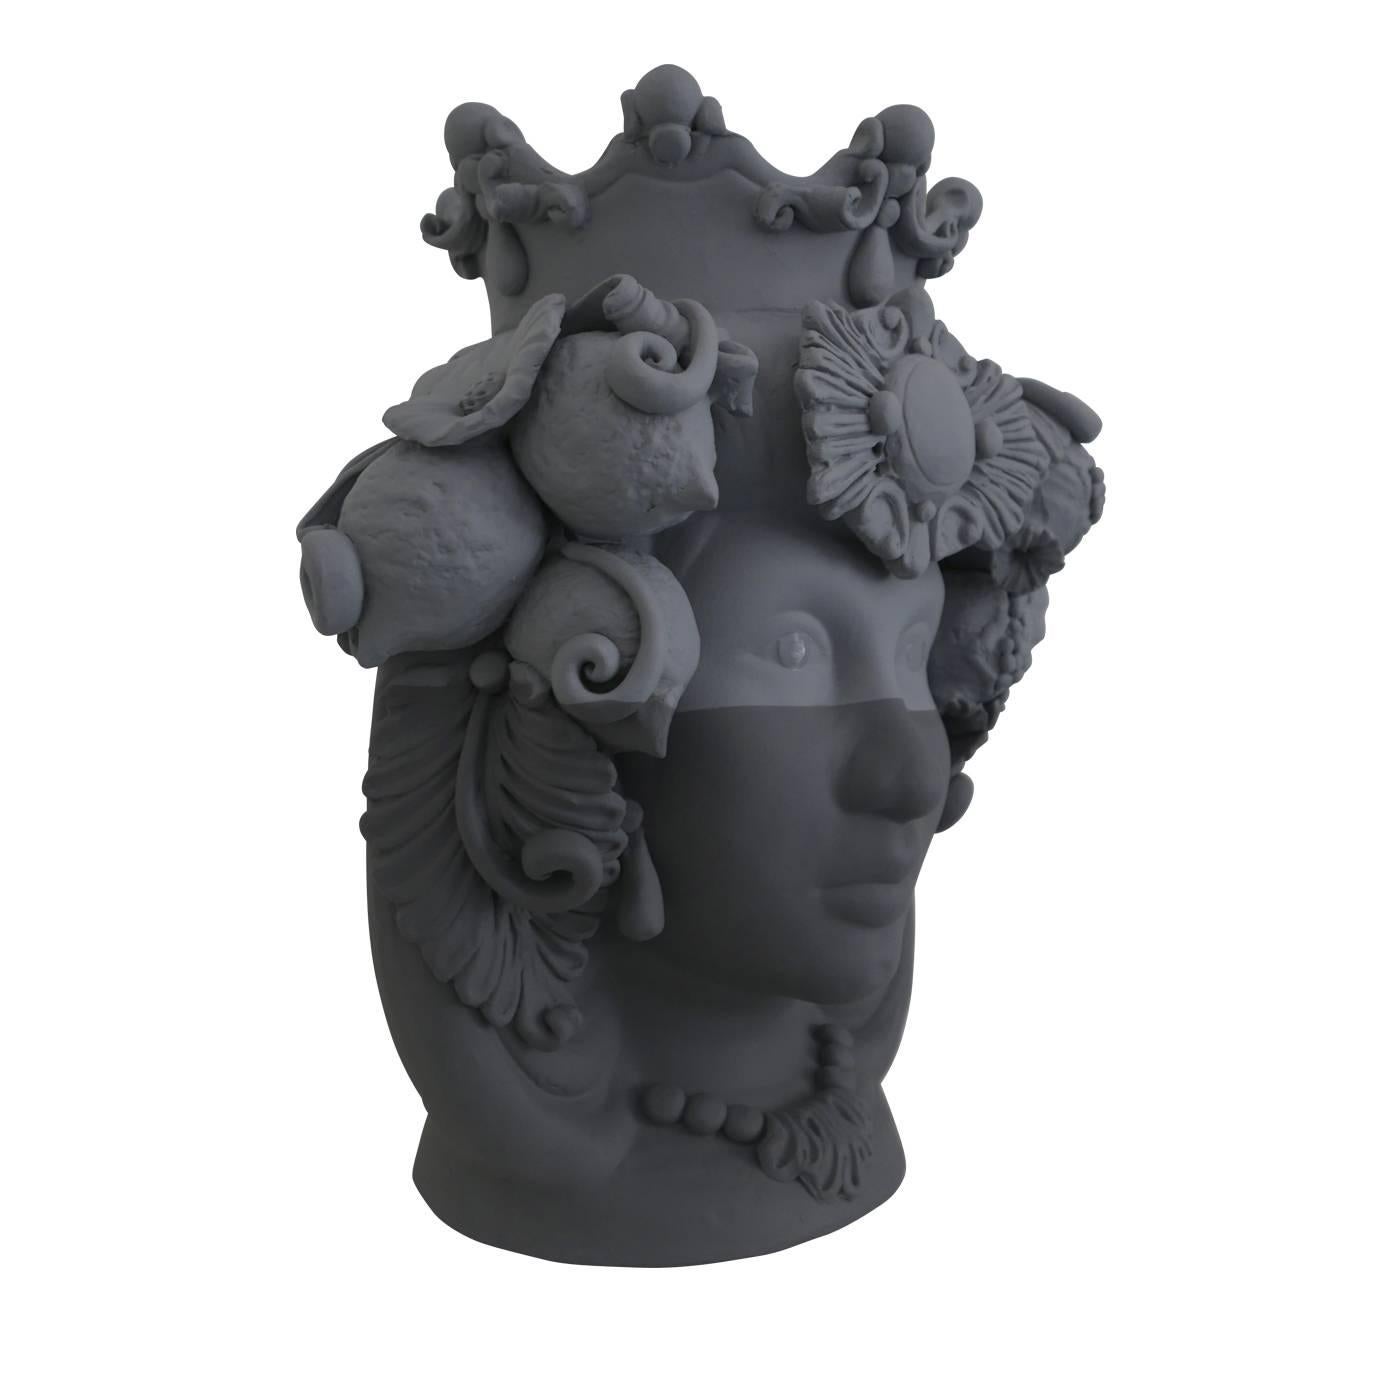 This anthropomorphic vase is made entirely by hand and painted in bi-color dark gray and light grey matte hues, rich in natural pigments and resin binders that provide intense color depth. Only the eyes are glazed so they stand out, emphasizing the